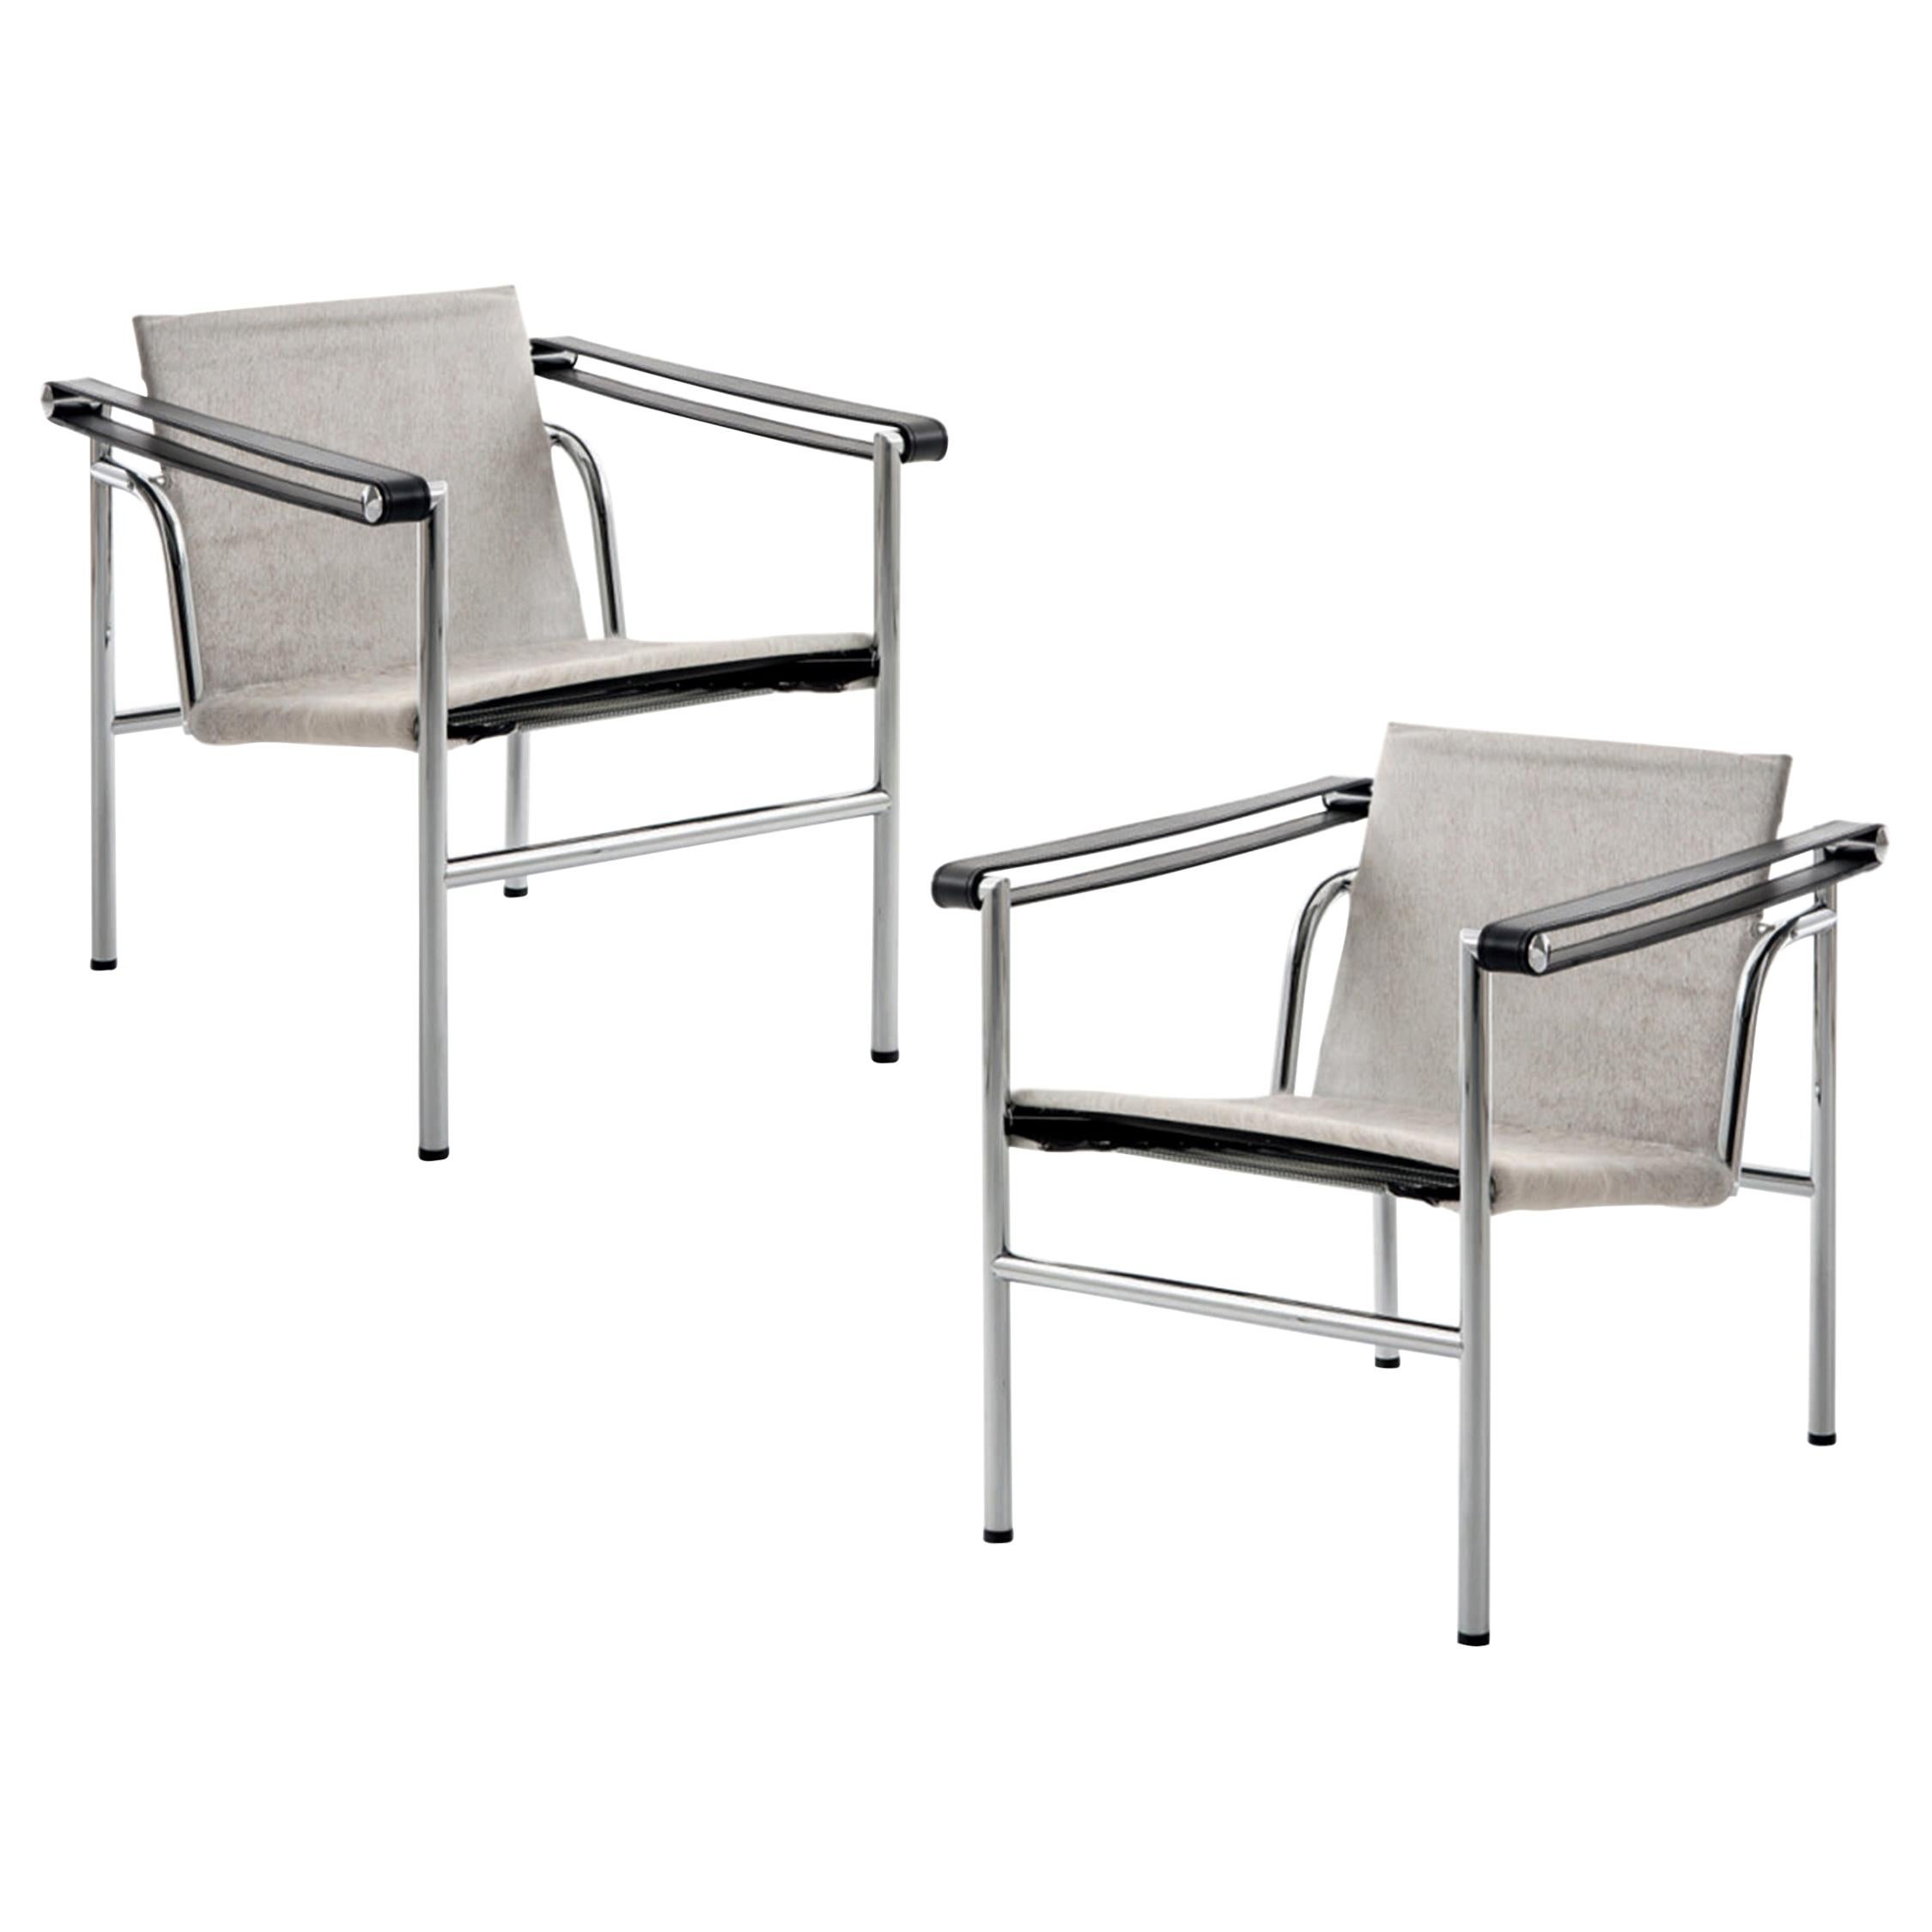 Set of Two LC1 Chairs by Le Corbusier, Pierre Jeanneret, Charlotte Perriand